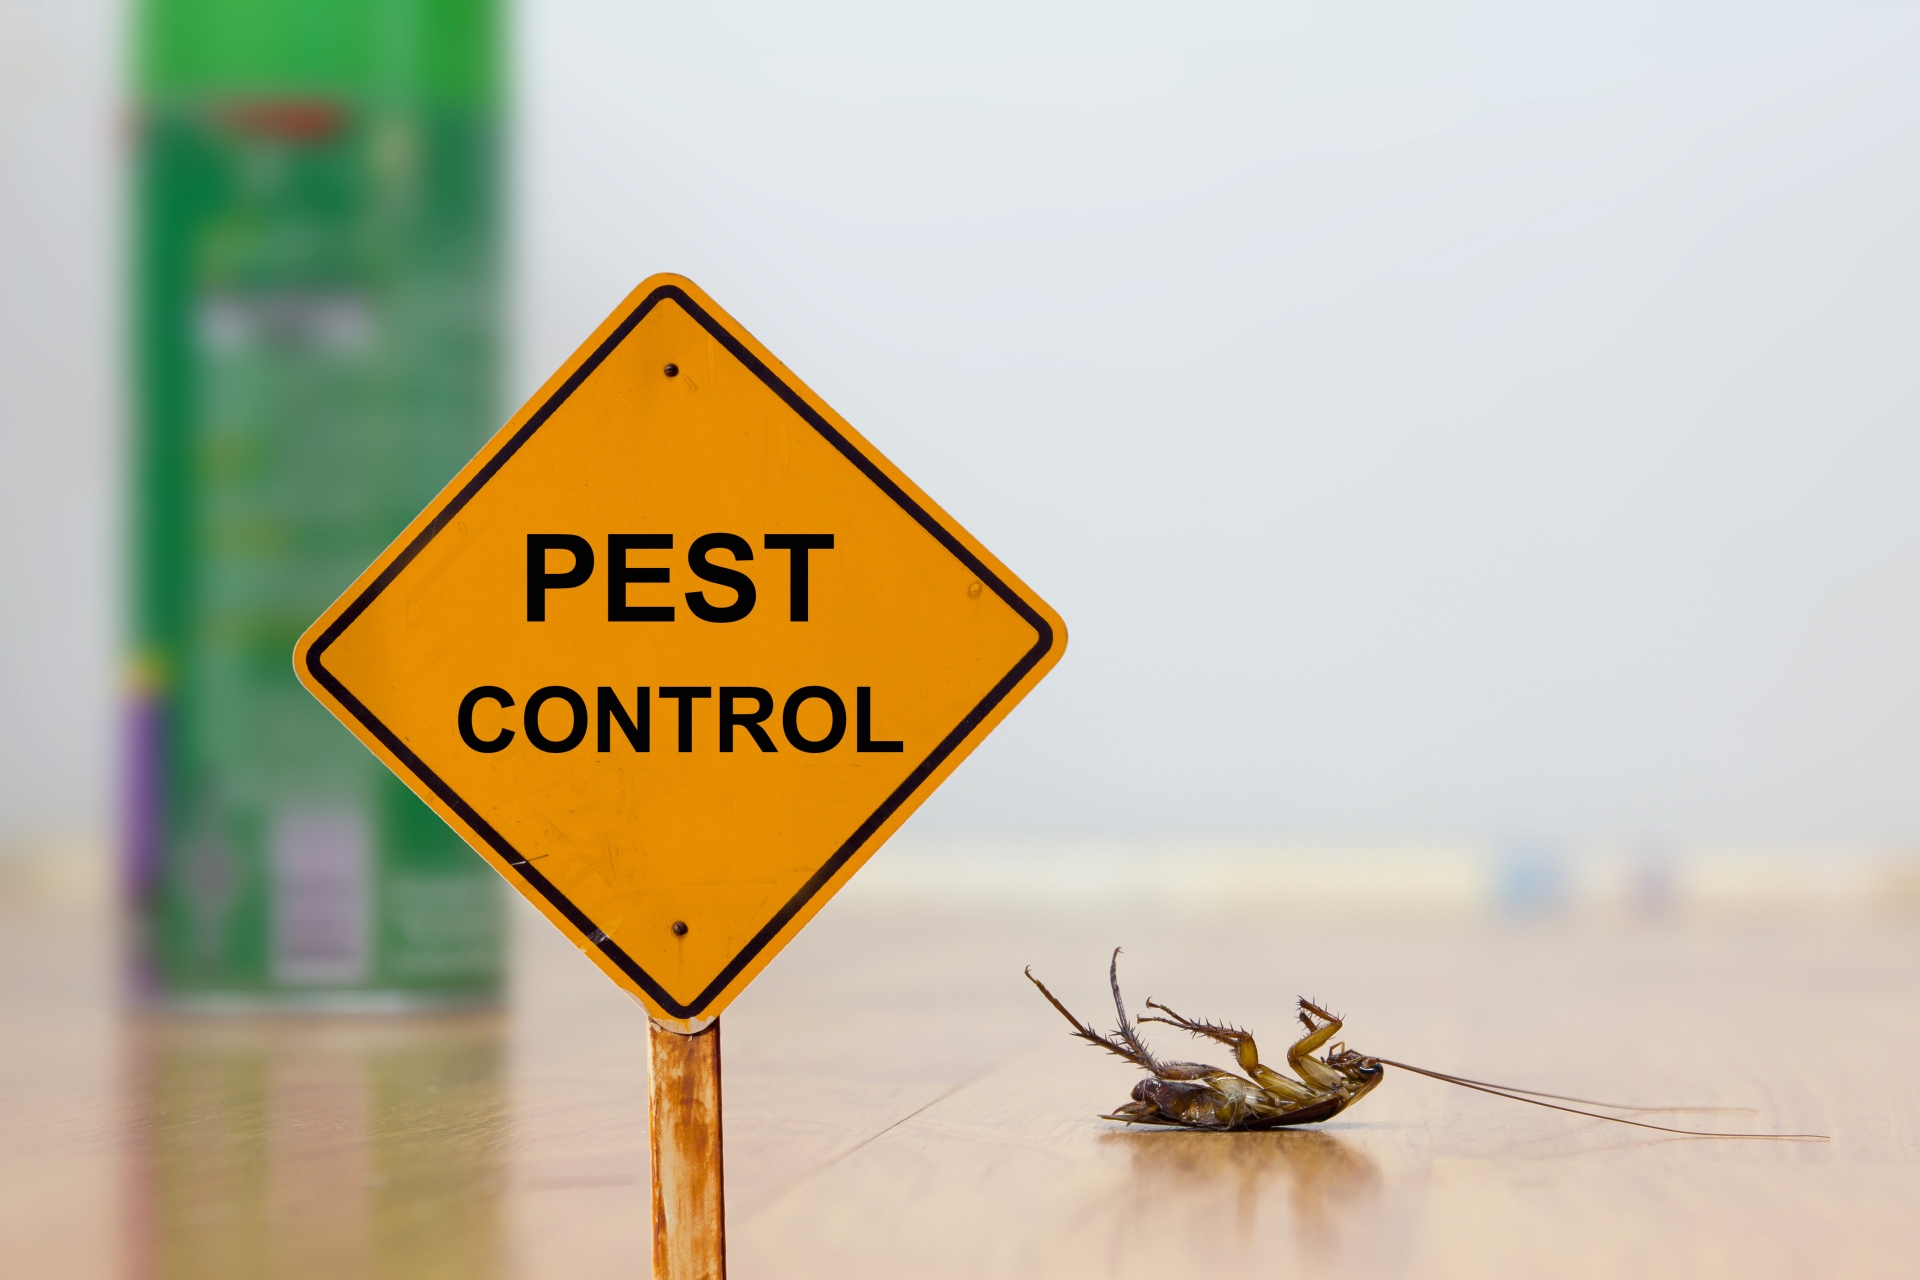 24 Hour Pest Control, Pest Control in Plumstead, SE18. Call Now 020 8166 9746